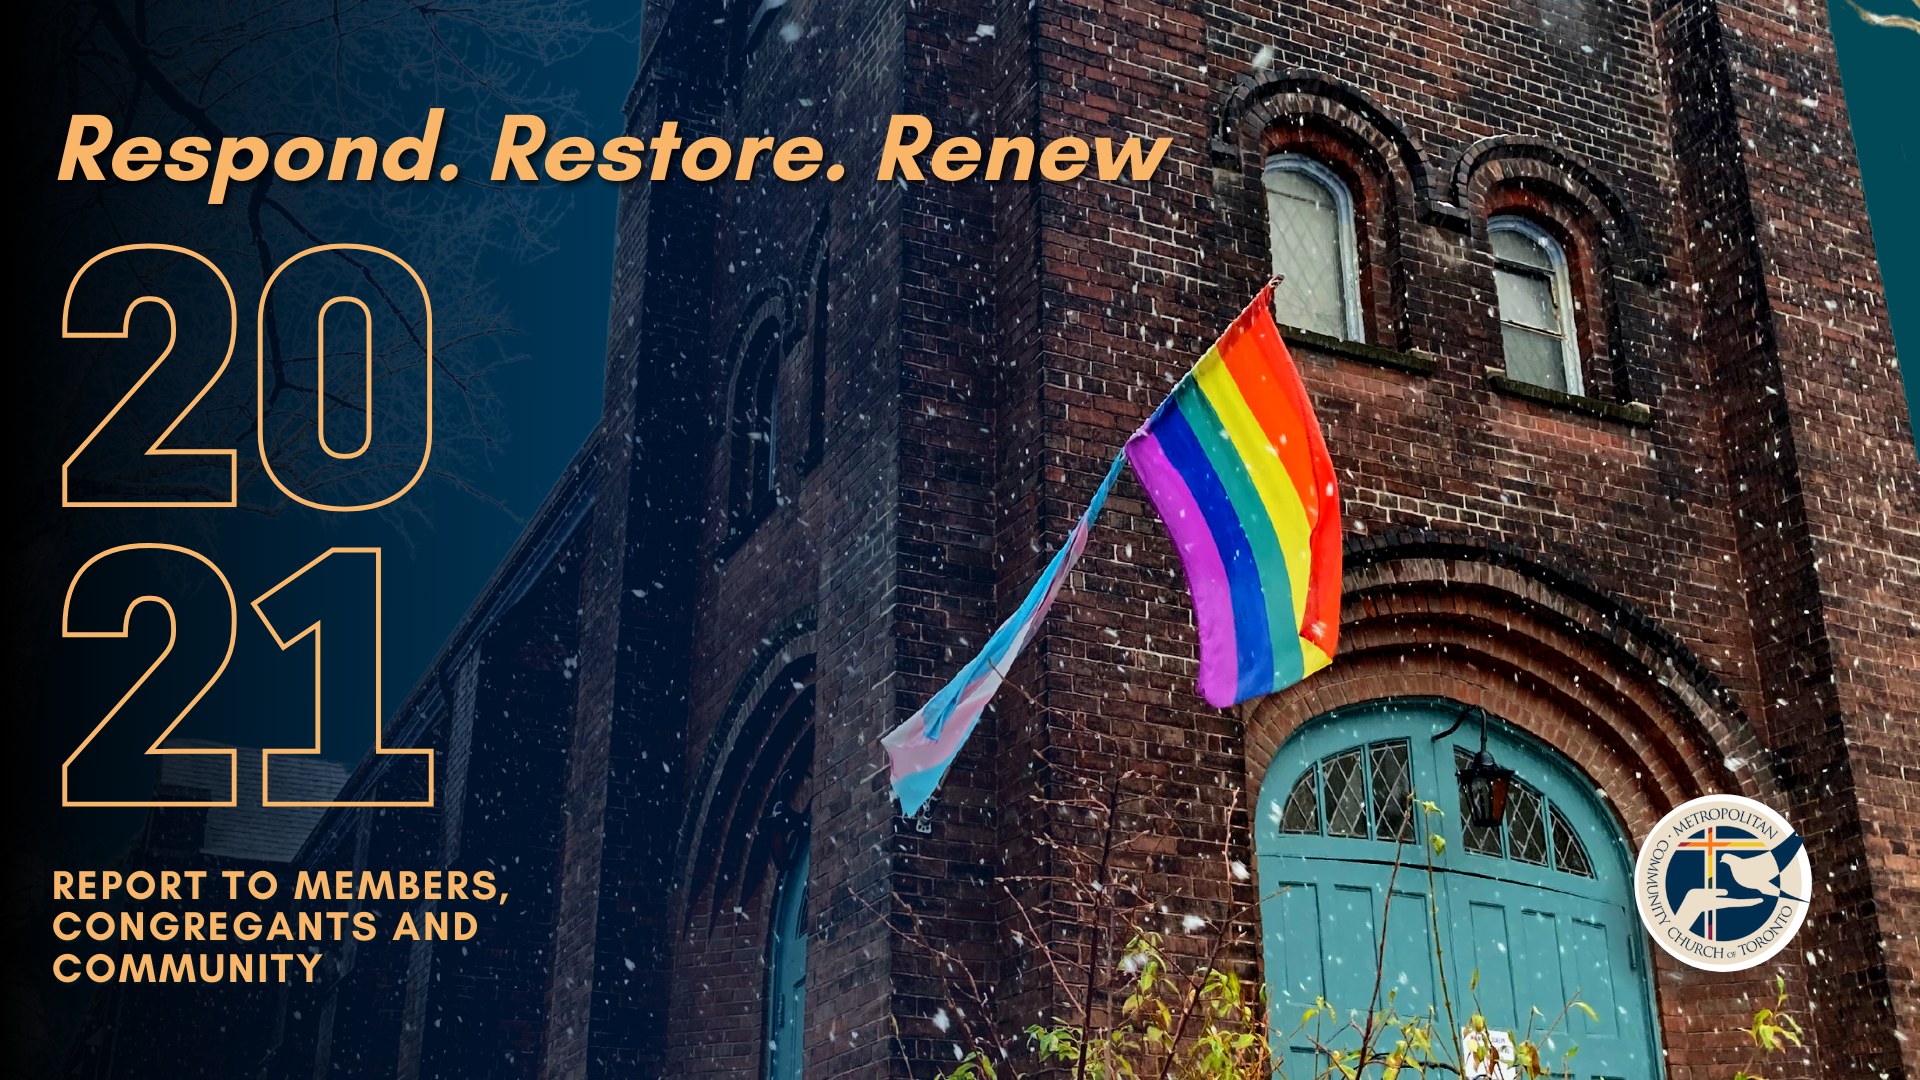 Picture of MCC Toronto's building with Pride flags, and the text saying "Respond. Restore. Renew. 2021. Report to Members, Congregants and Community "